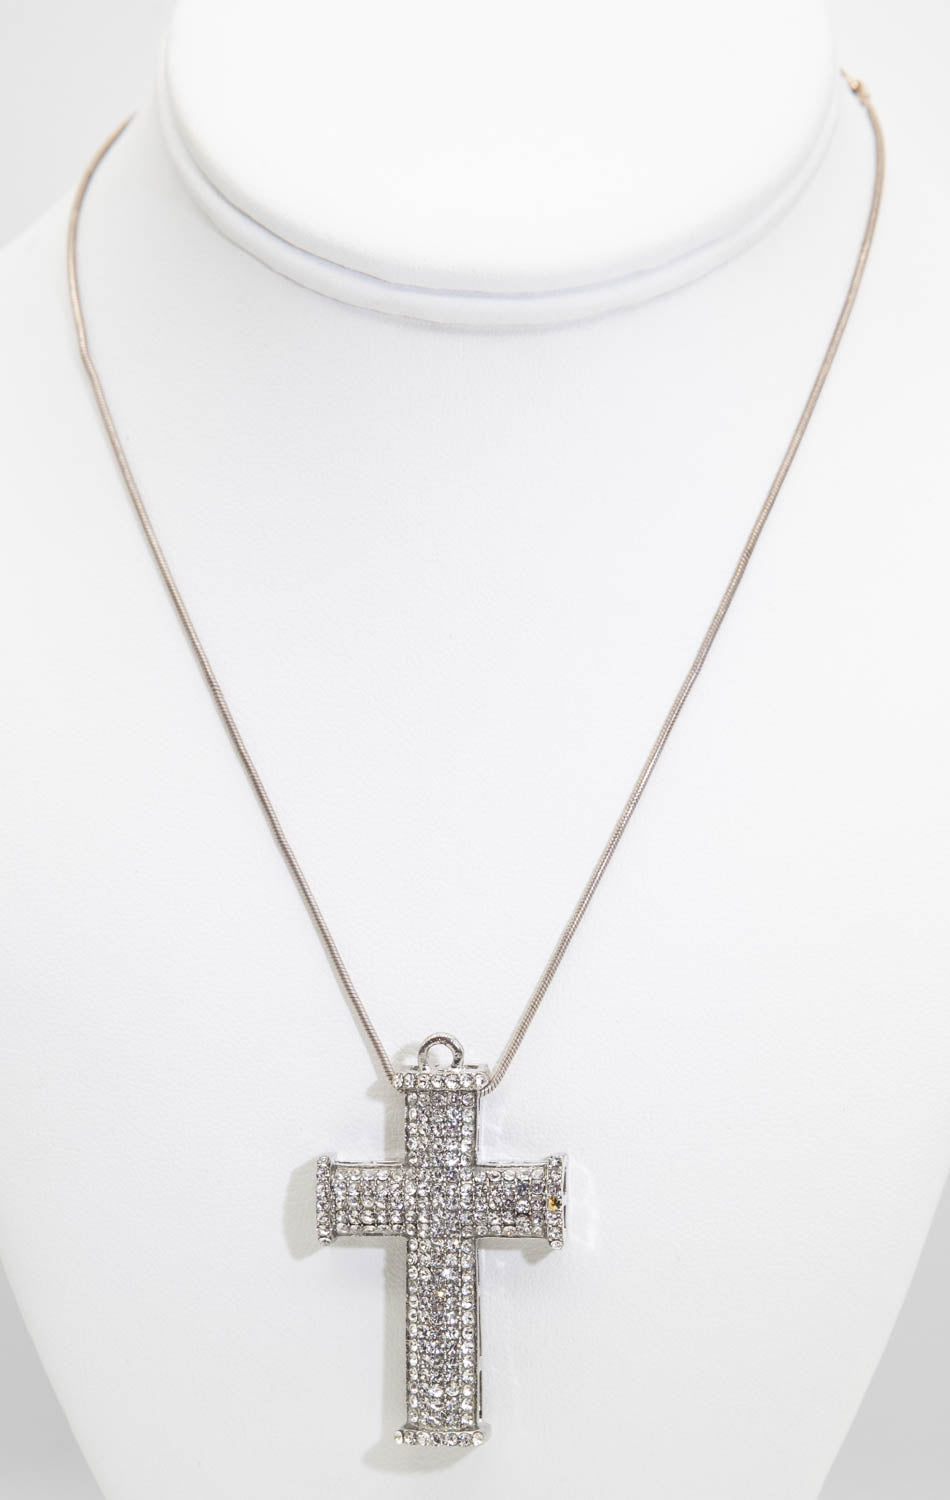 Vintage SS Rhinestone Cross Necklace and Pendant  - JD10795